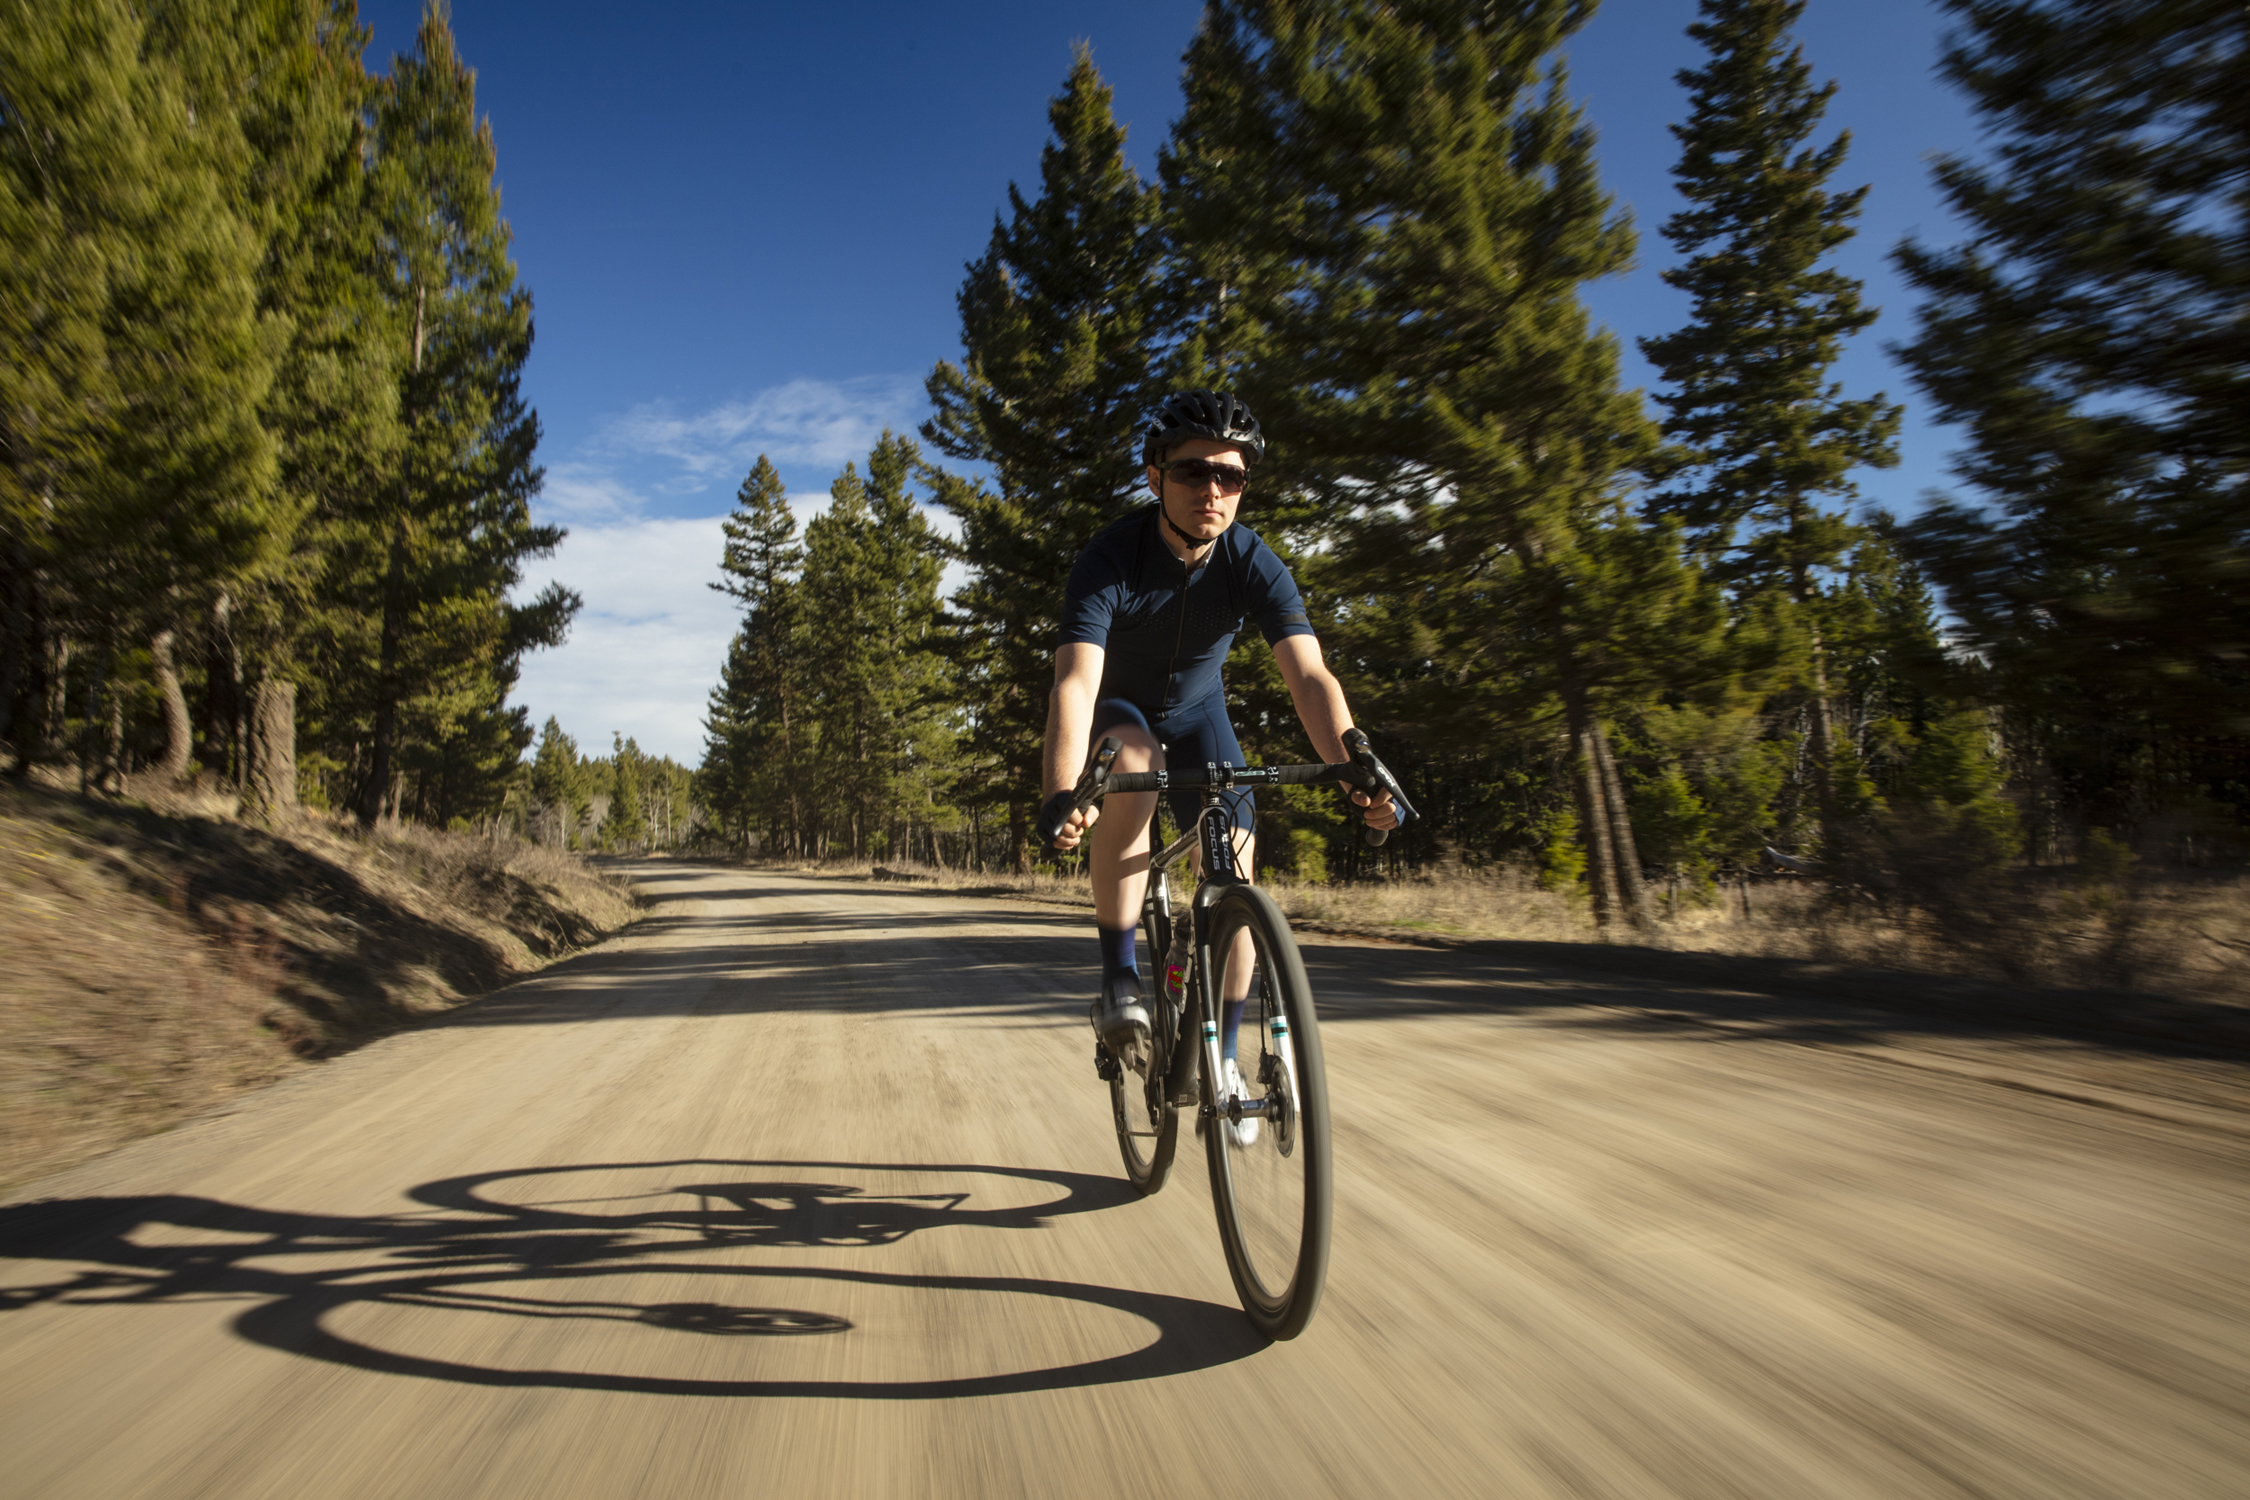 Getting the correct bicycle tire pressure for riding off road